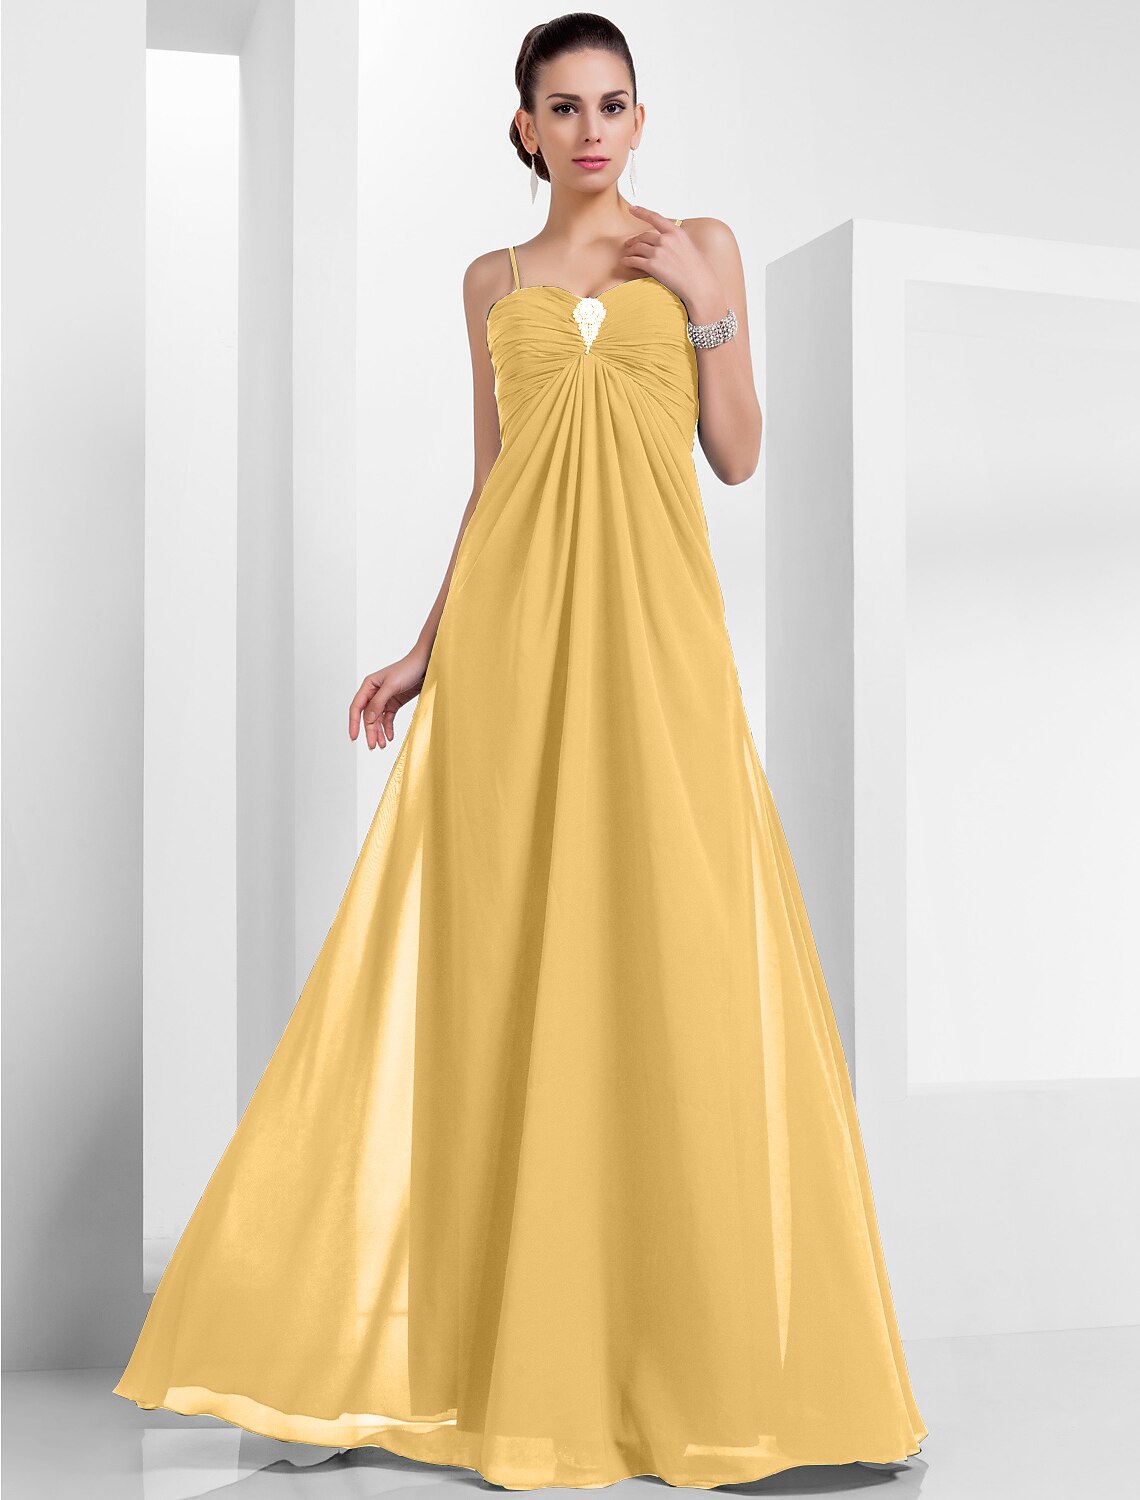 A-Line Empire Holiday Formal Evening Dress Spaghetti Strap Sleeveless Floor Length Chiffon with Crystals